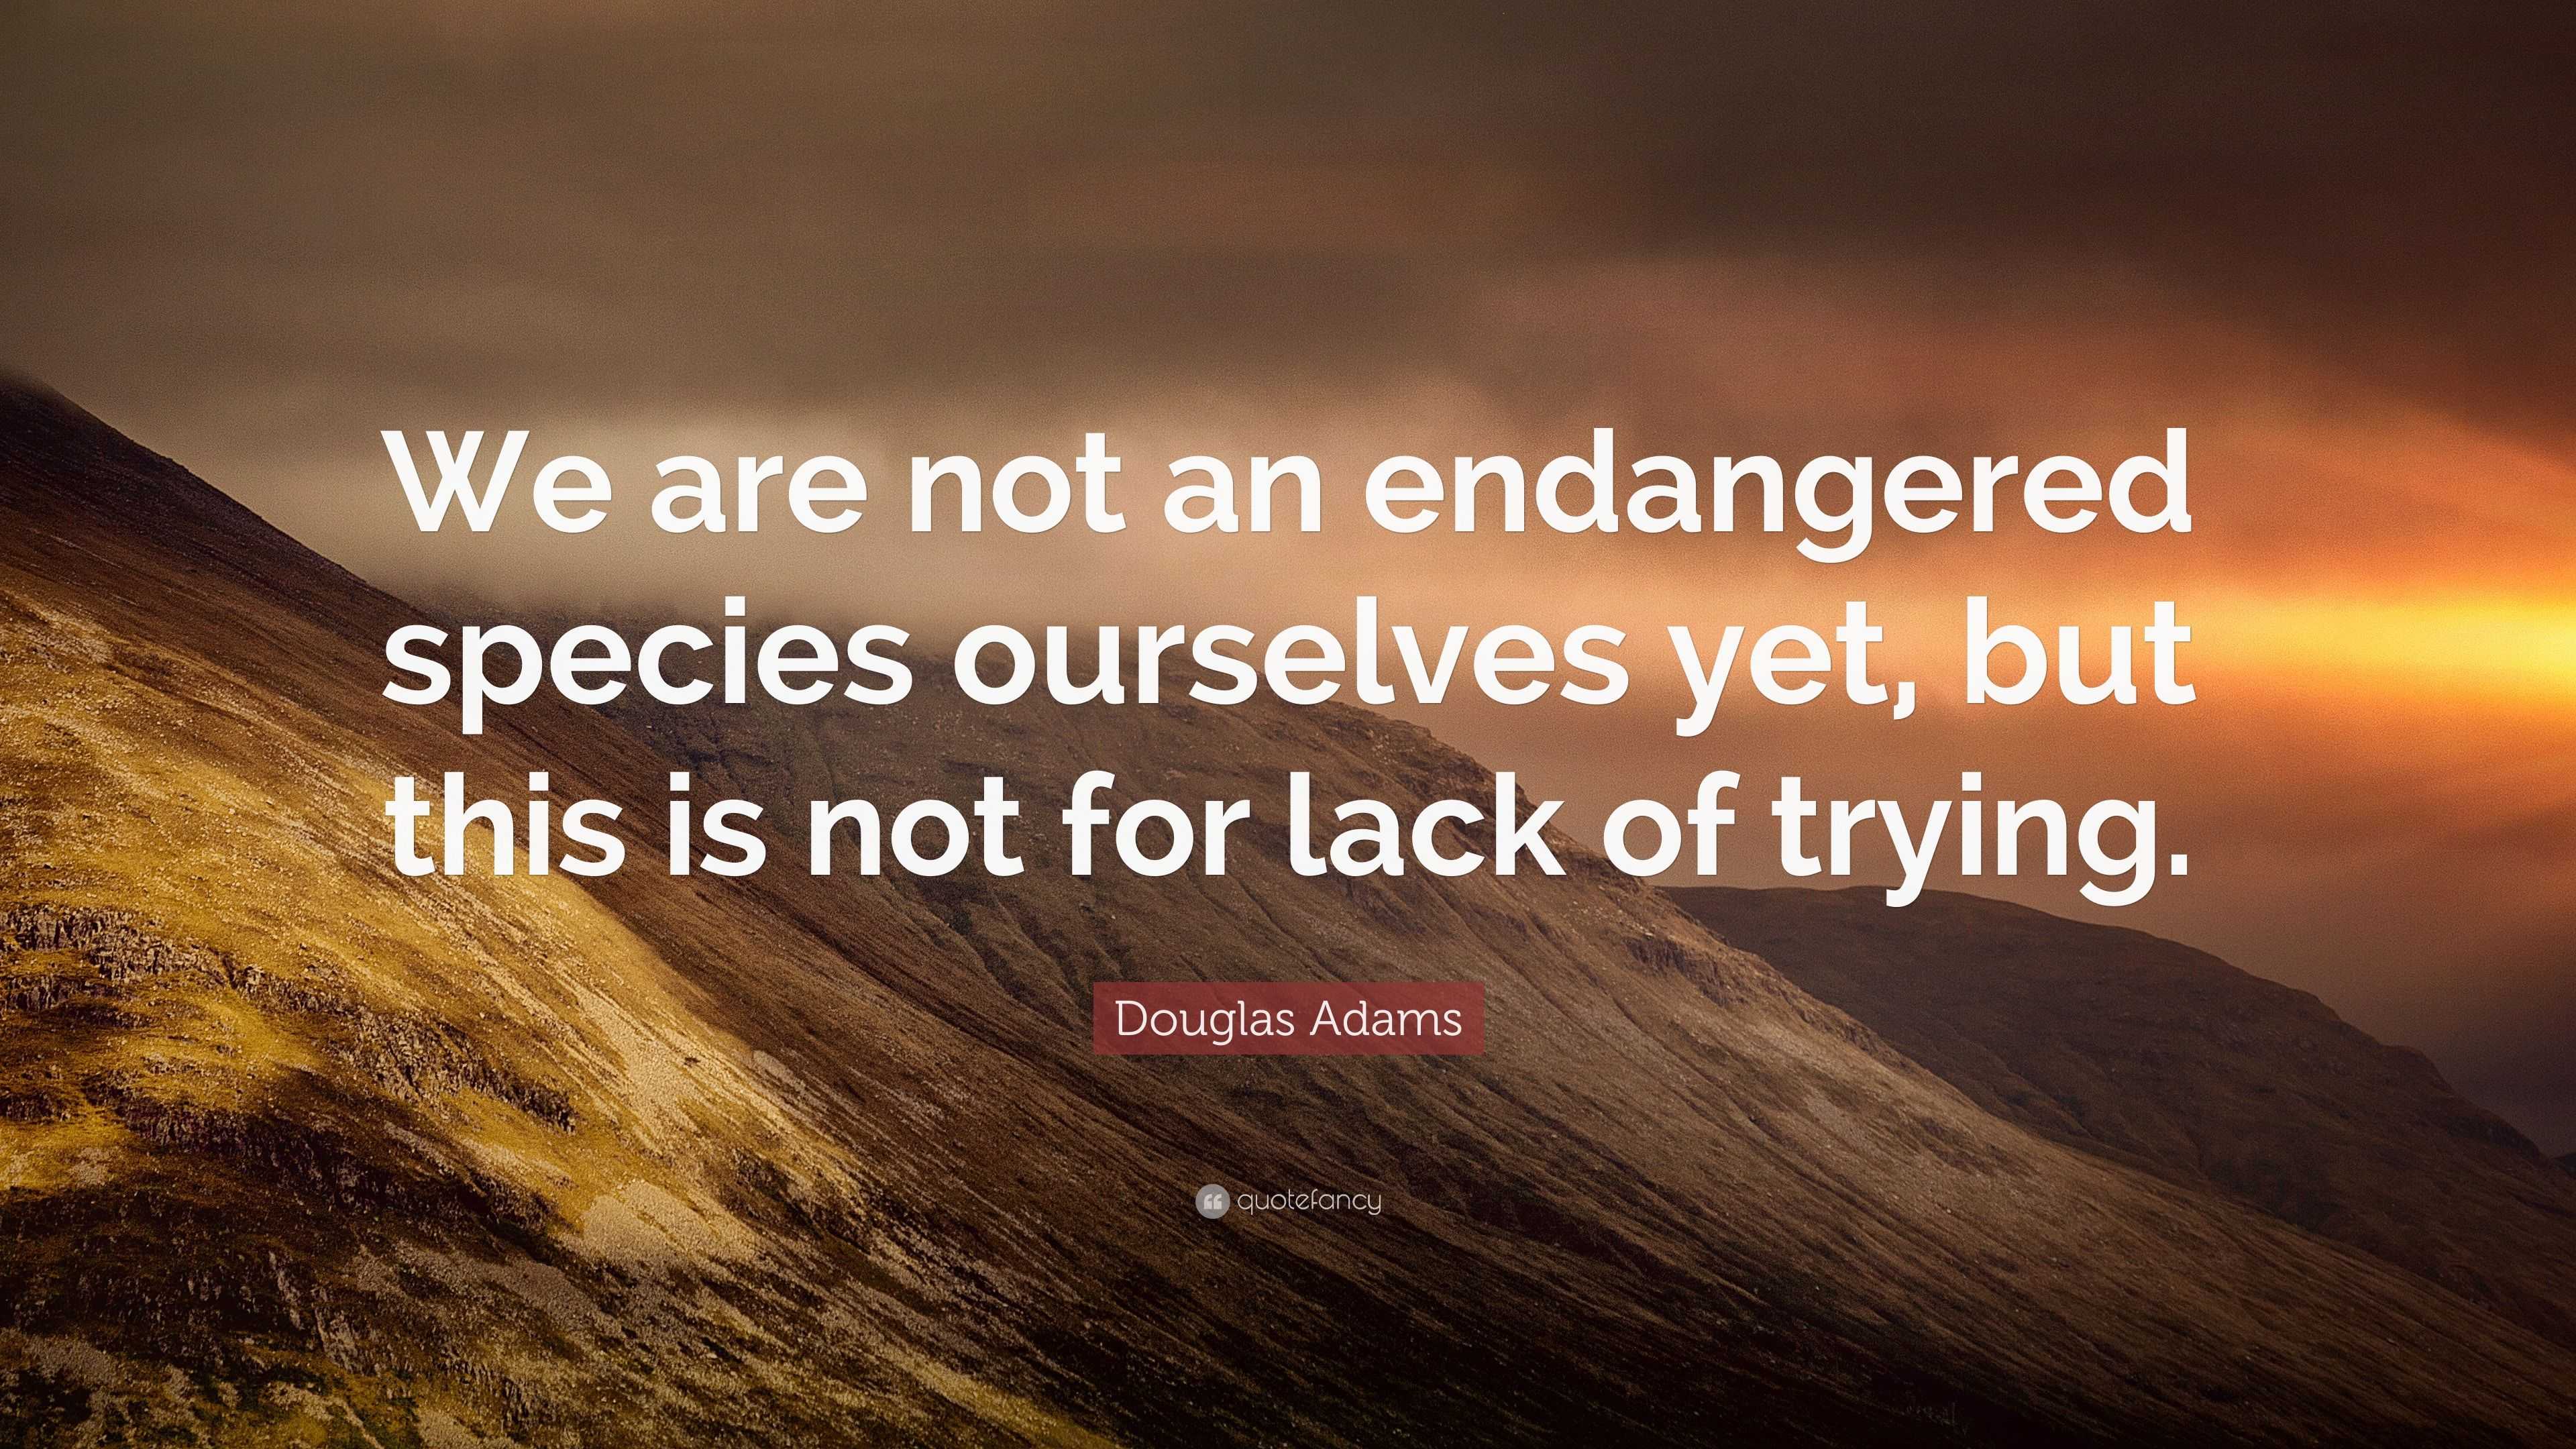 Douglas Adams Quote: “We are not an endangered species ourselves yet ...